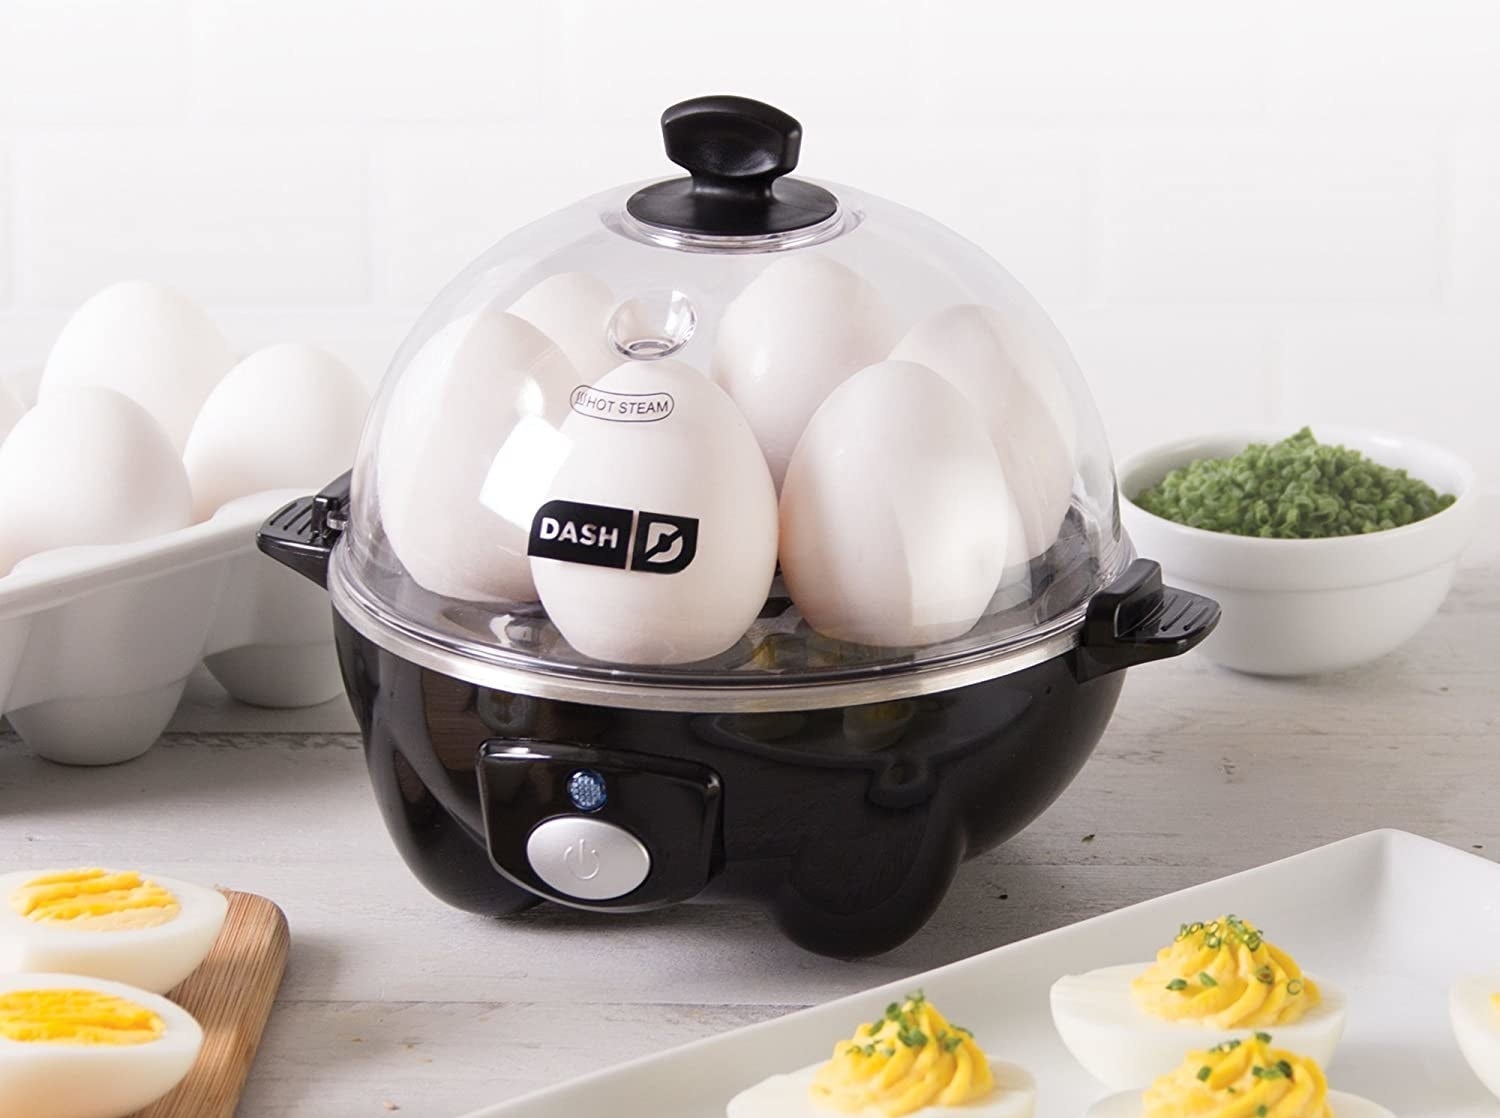 The egg cooker in black filled with six eggs